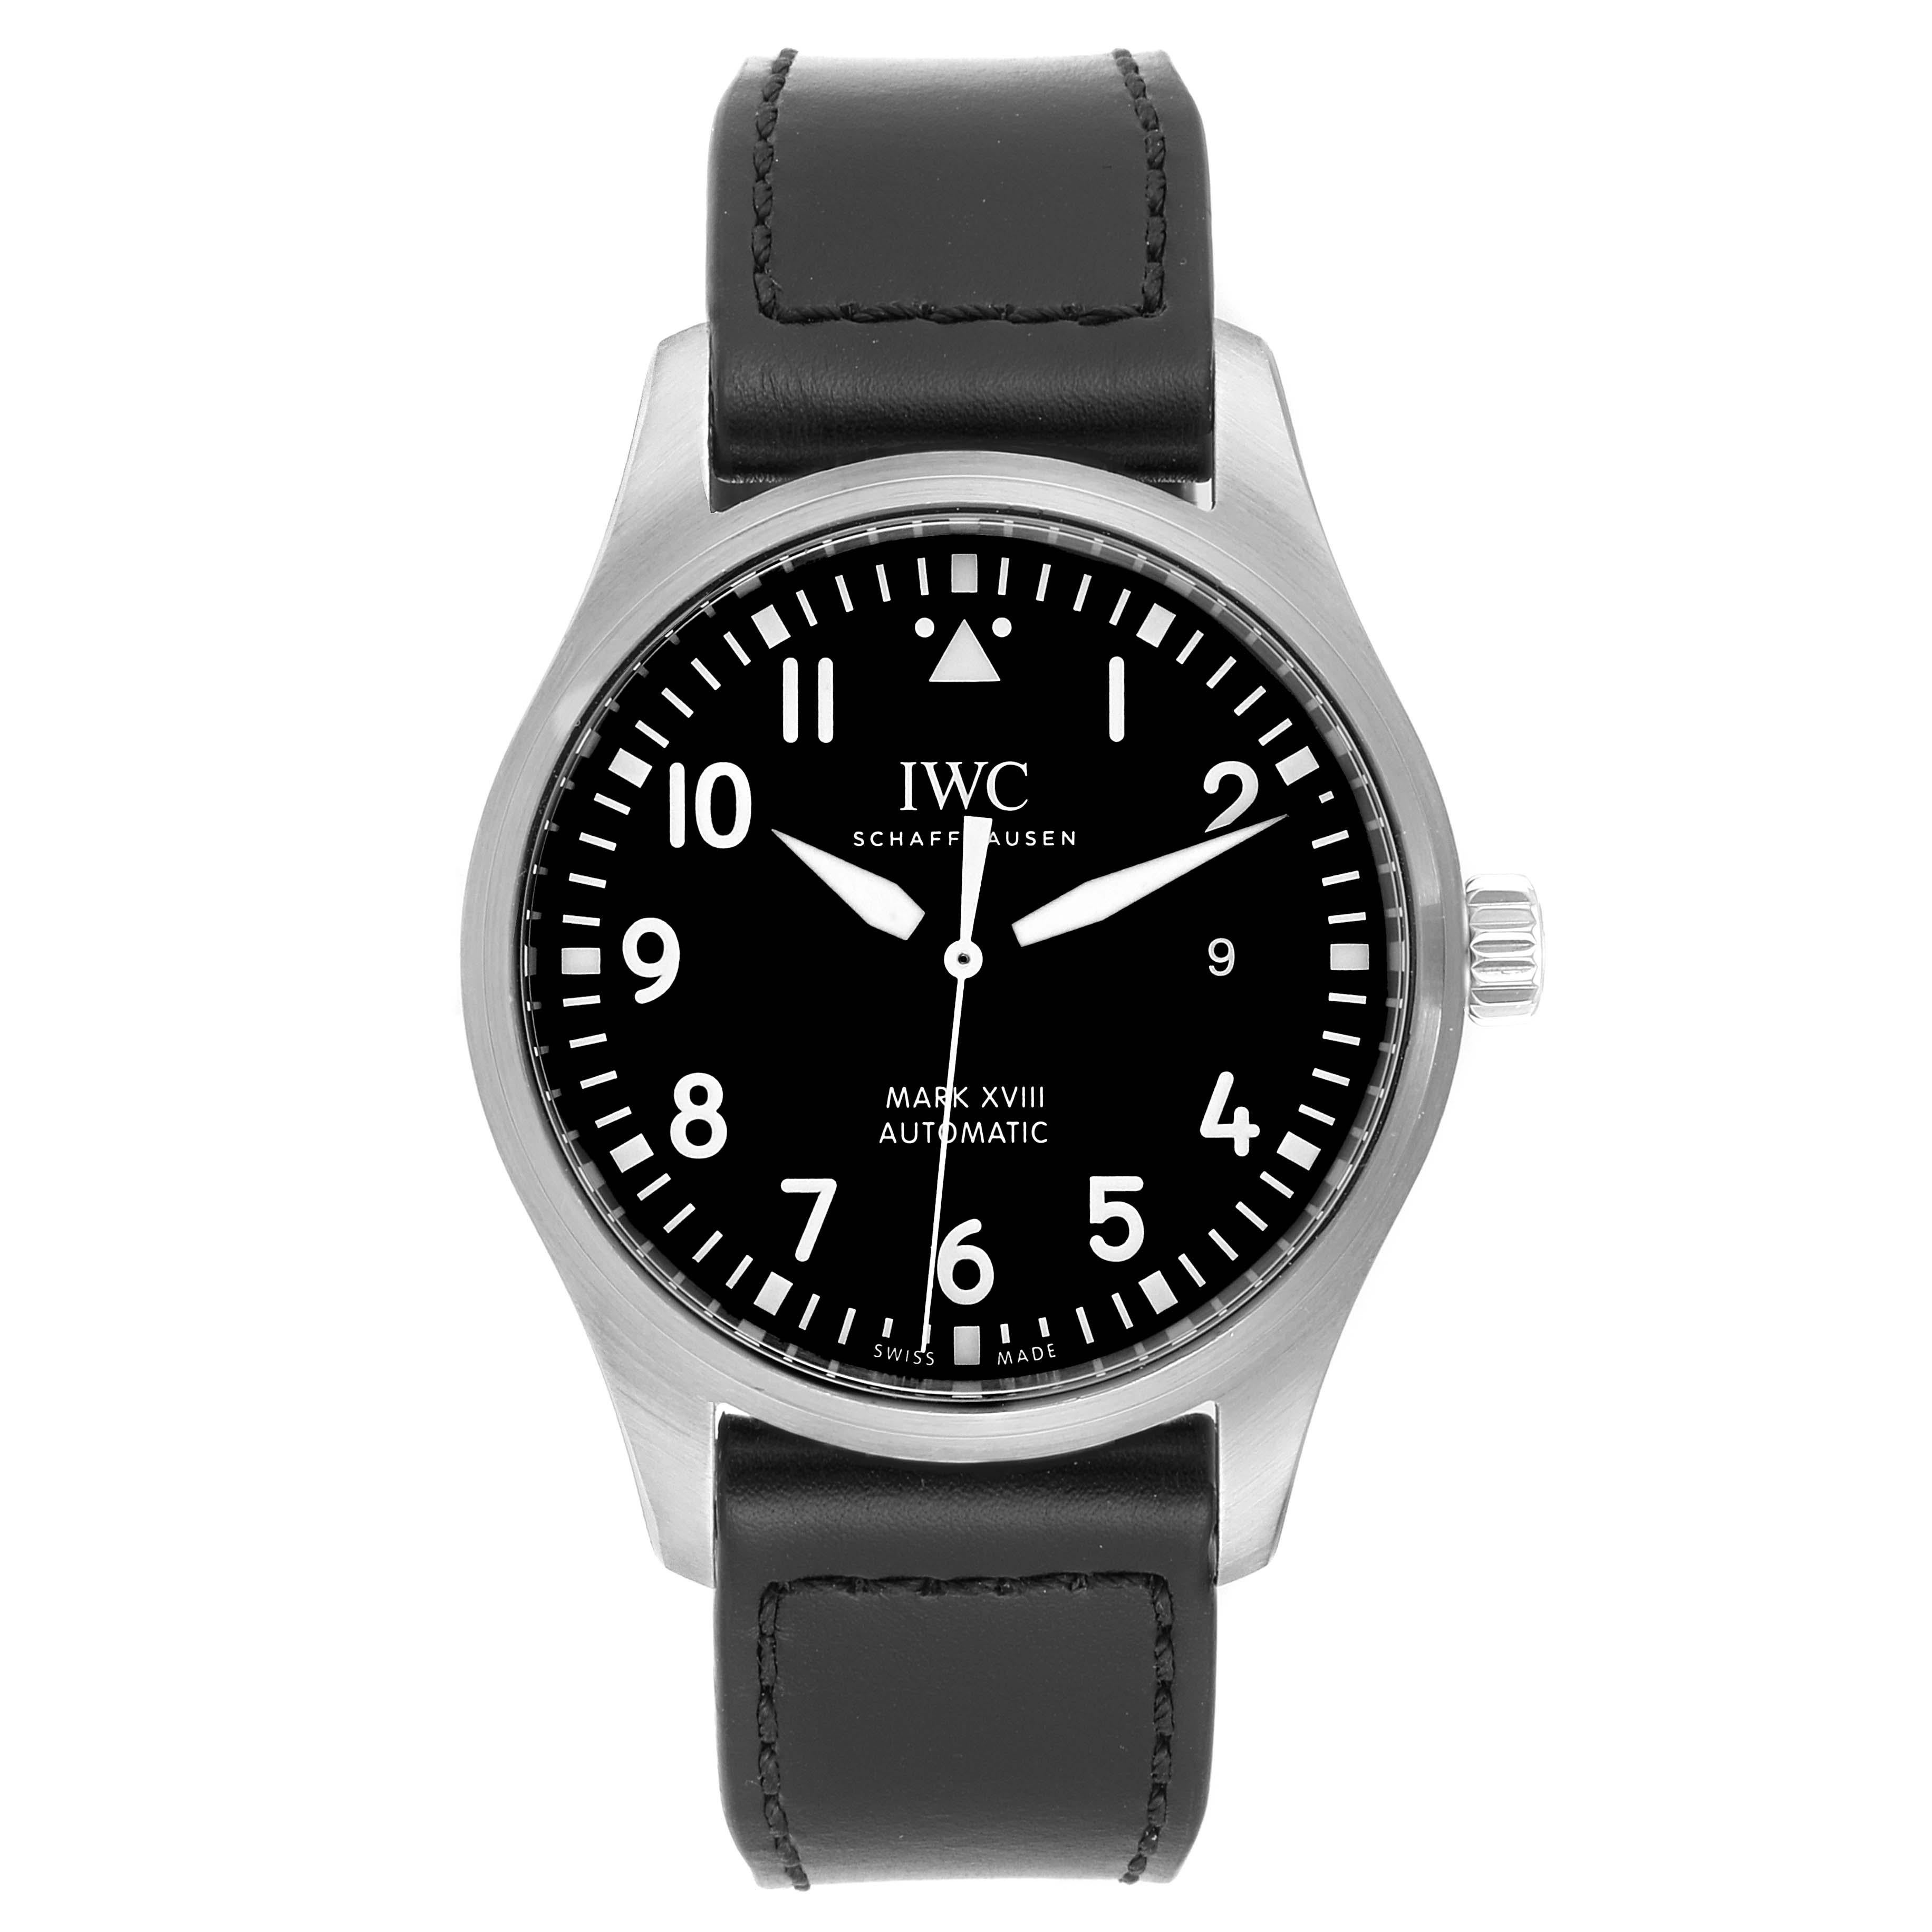 IWC Pilot Mark XVIII Black Dial Steel Mens Watch IW327001. Automatic self-winding movement with 42 hour power reserve. Stainless steel case 40 mm in diameter. Stainless steel bezel. Scratch resistant sapphire crystal. Black dial with luminous hands